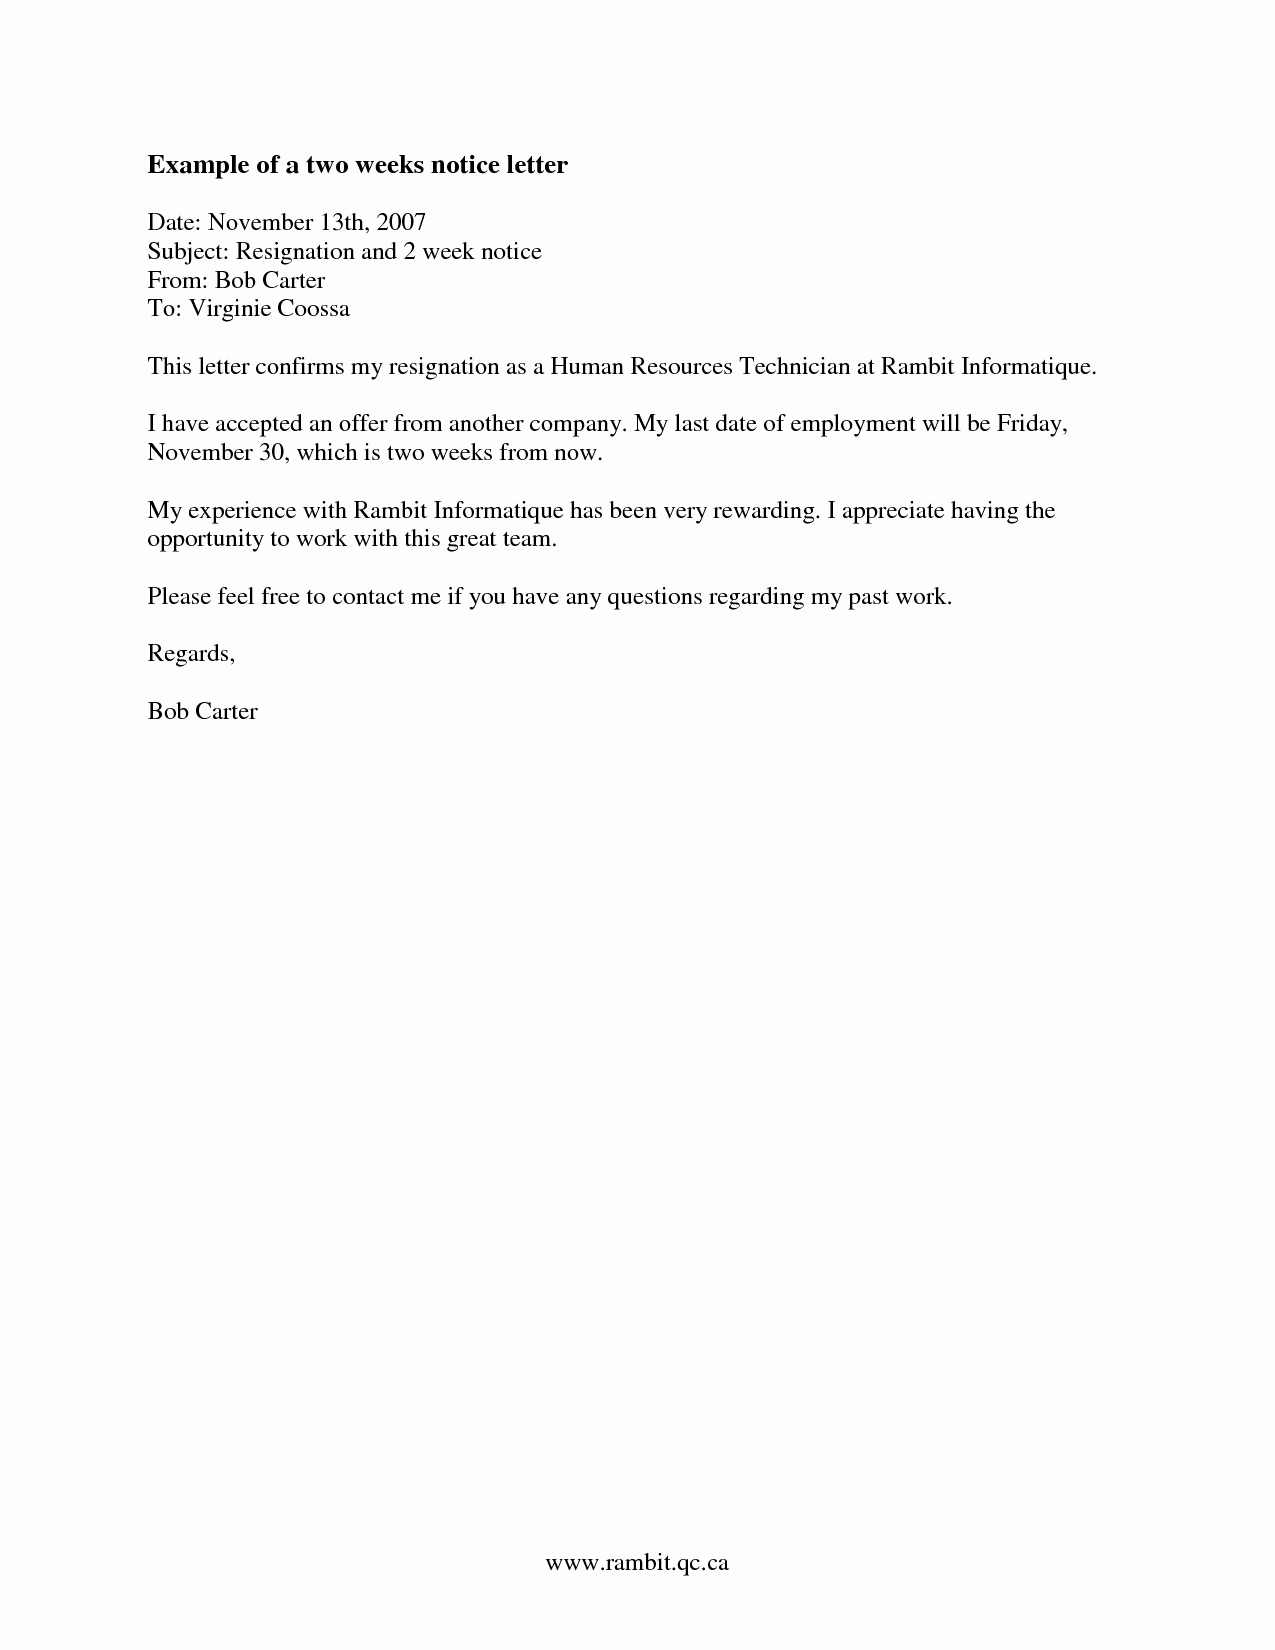 Resignation Letter 2 Week Notice Luxury How to Find Examples Of Two Week Notice Recipes